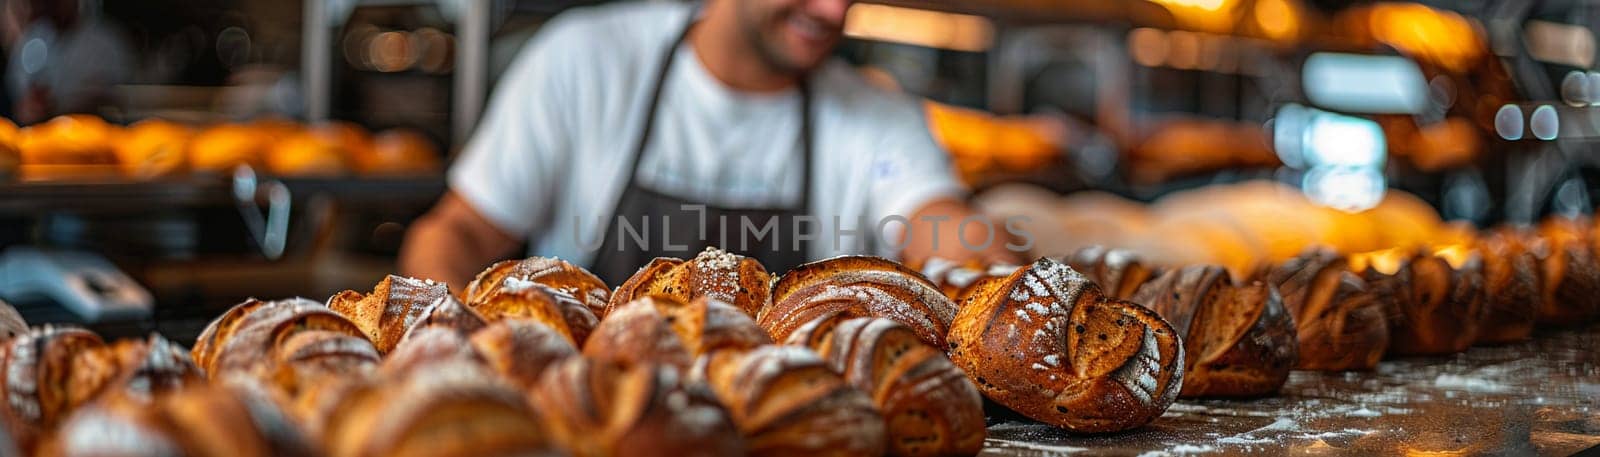 Artisan Baker Crafts Specialty Breads for Business Clients, The scent of fresh bread fills the air as a baker prepares loaves for discerning businesses.